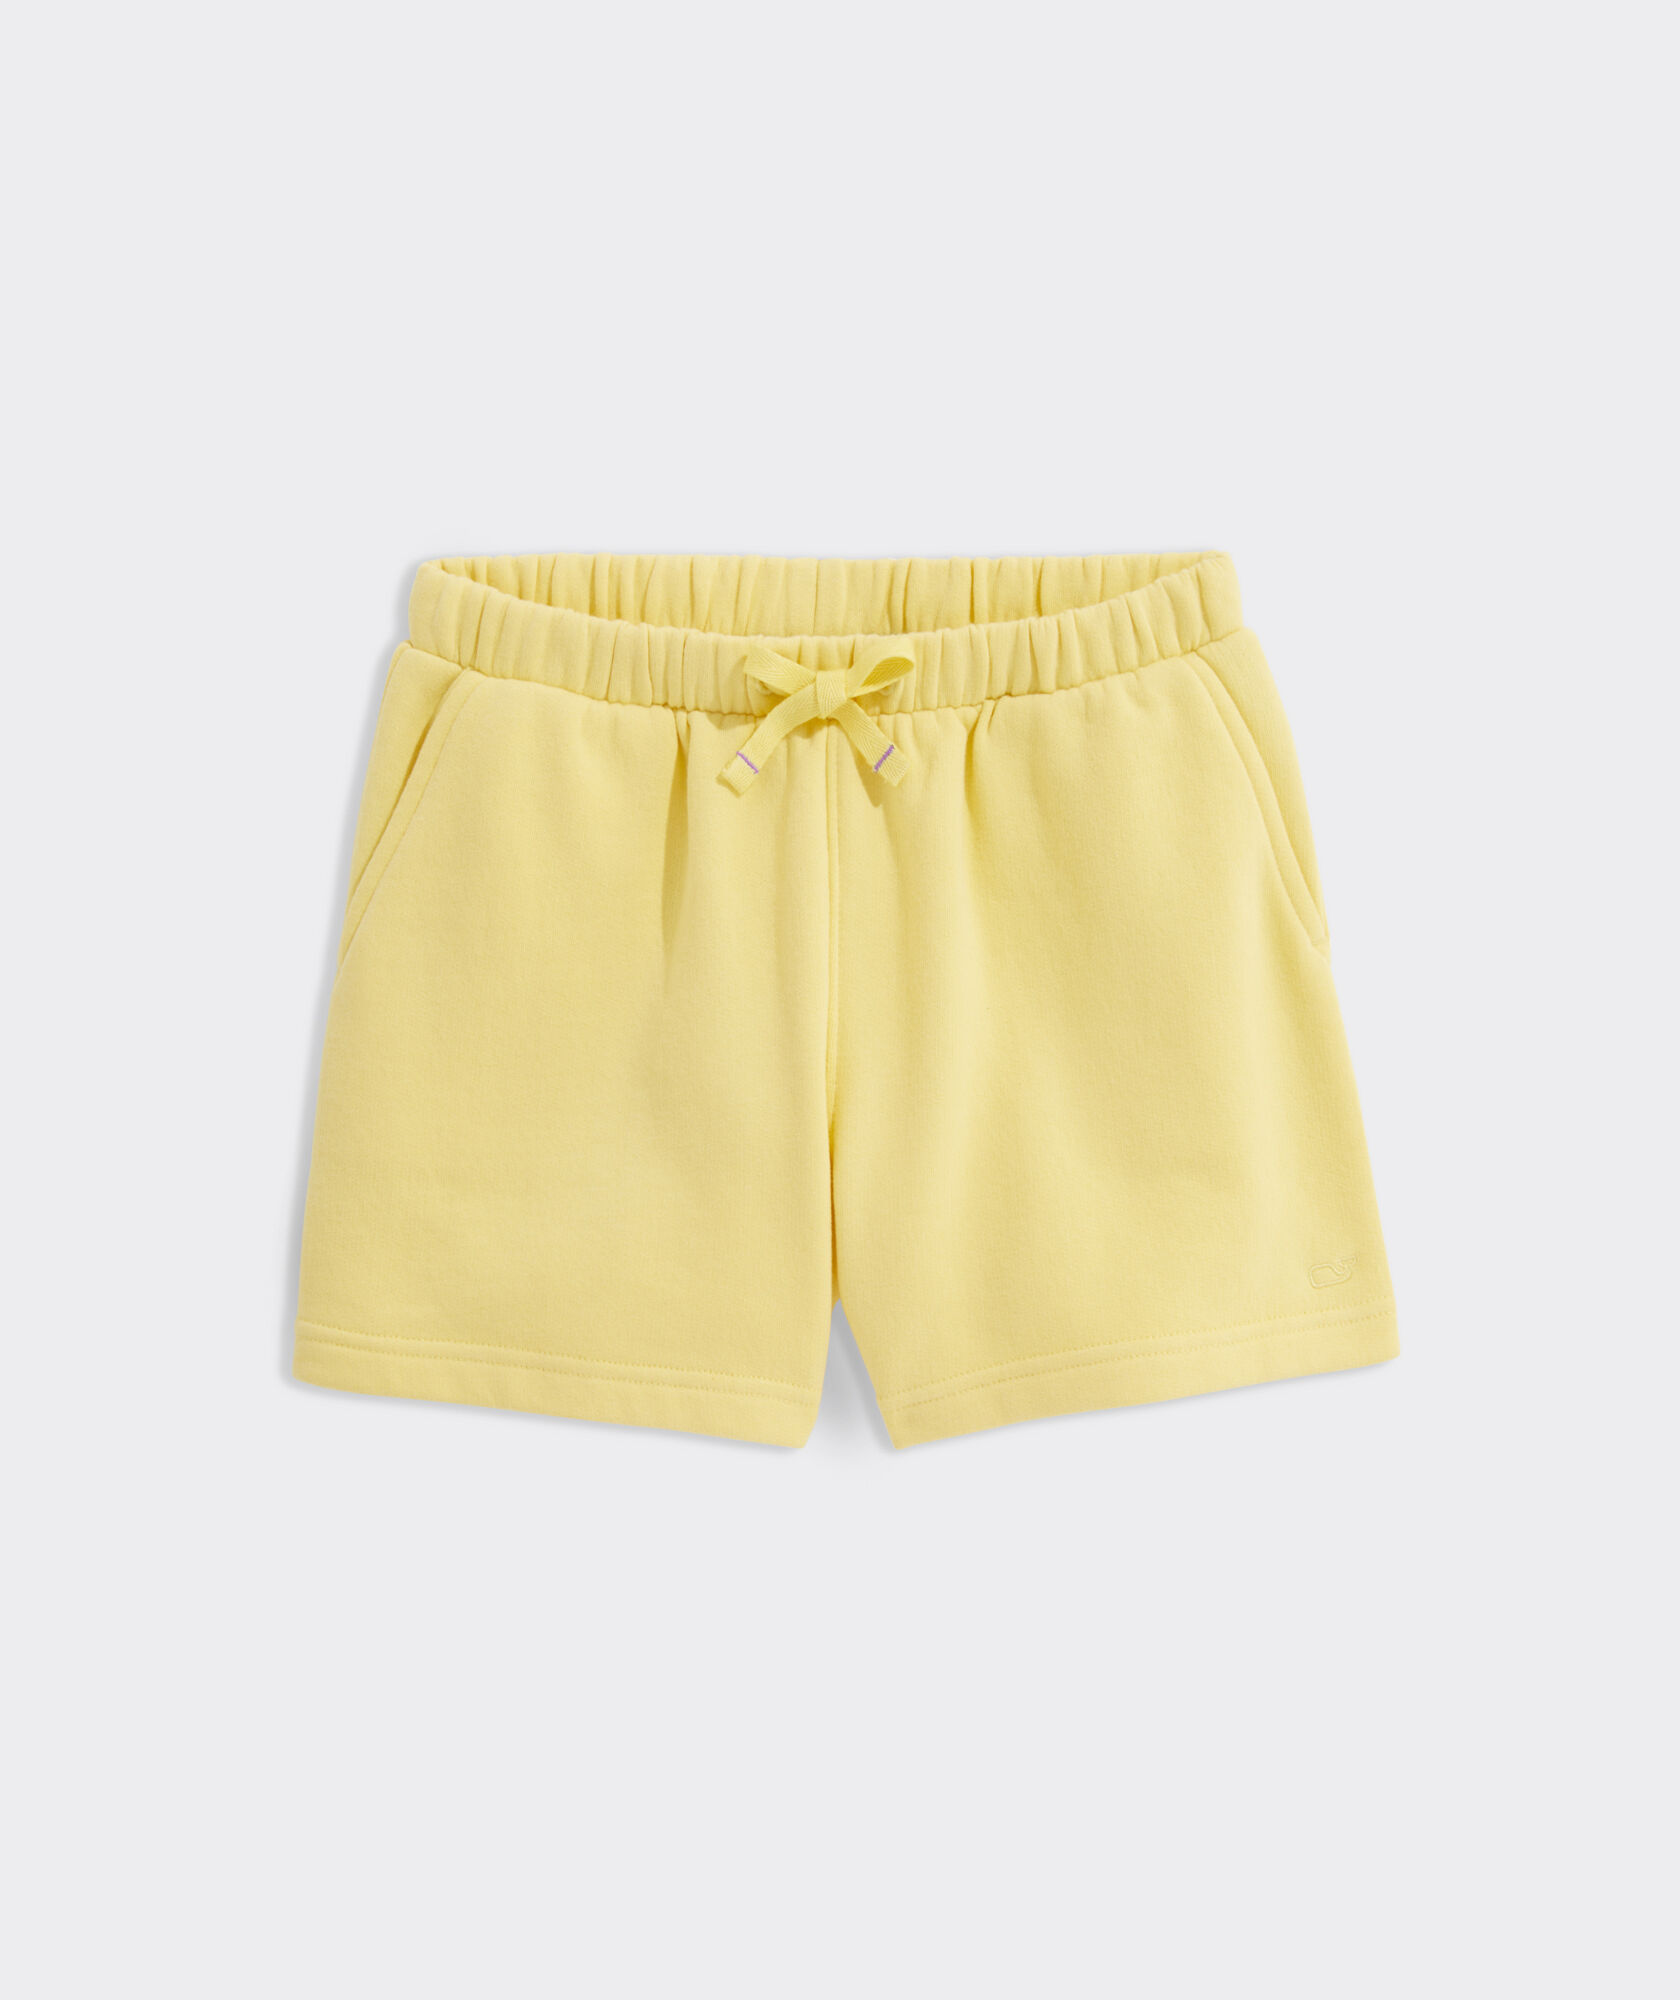 Girls' French Terry Gym Short